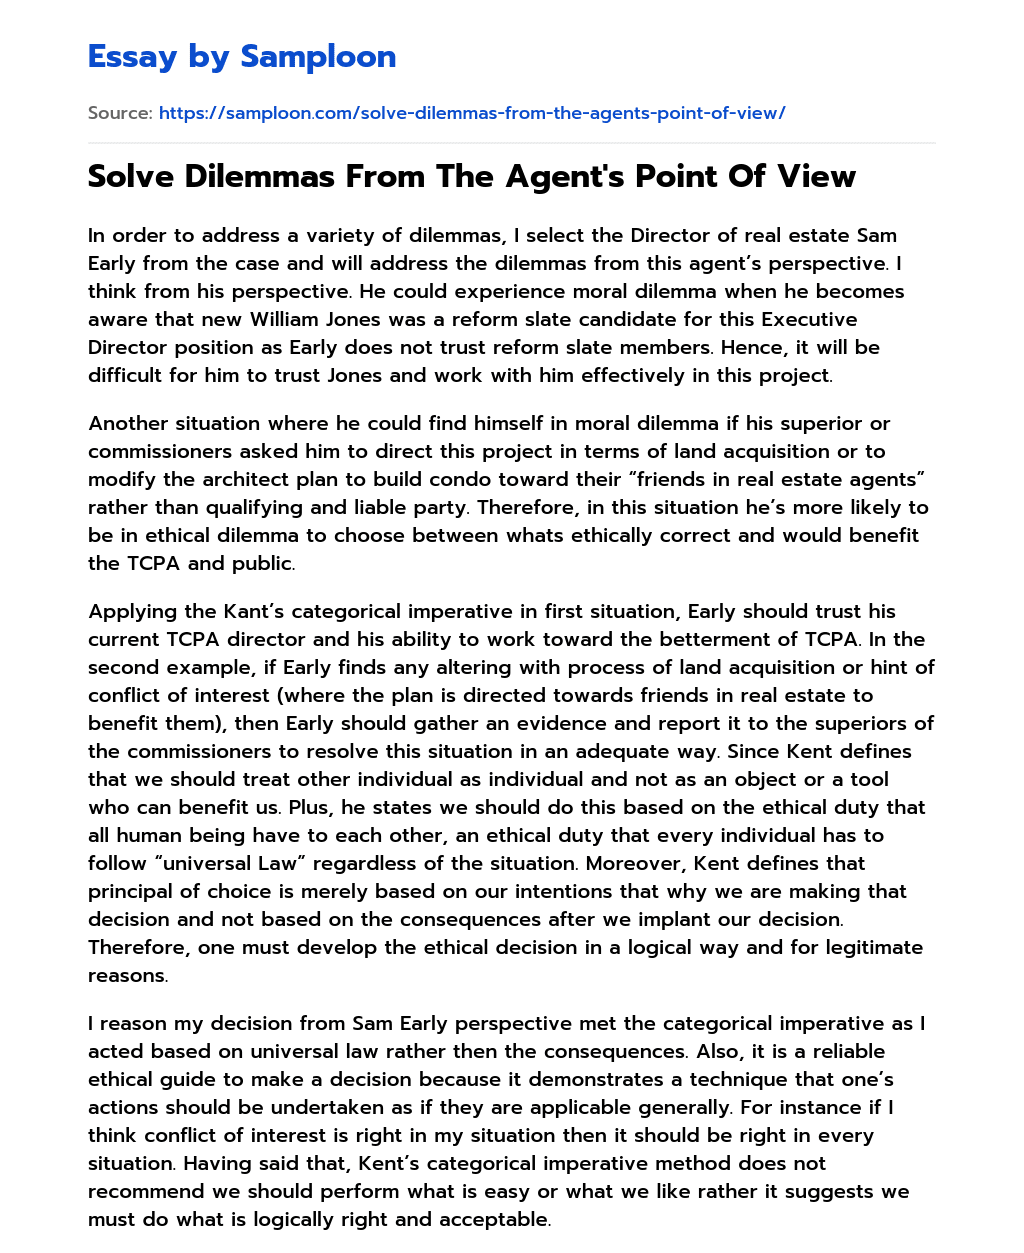 Solve Dilemmas From The Agent’s Point Of View essay